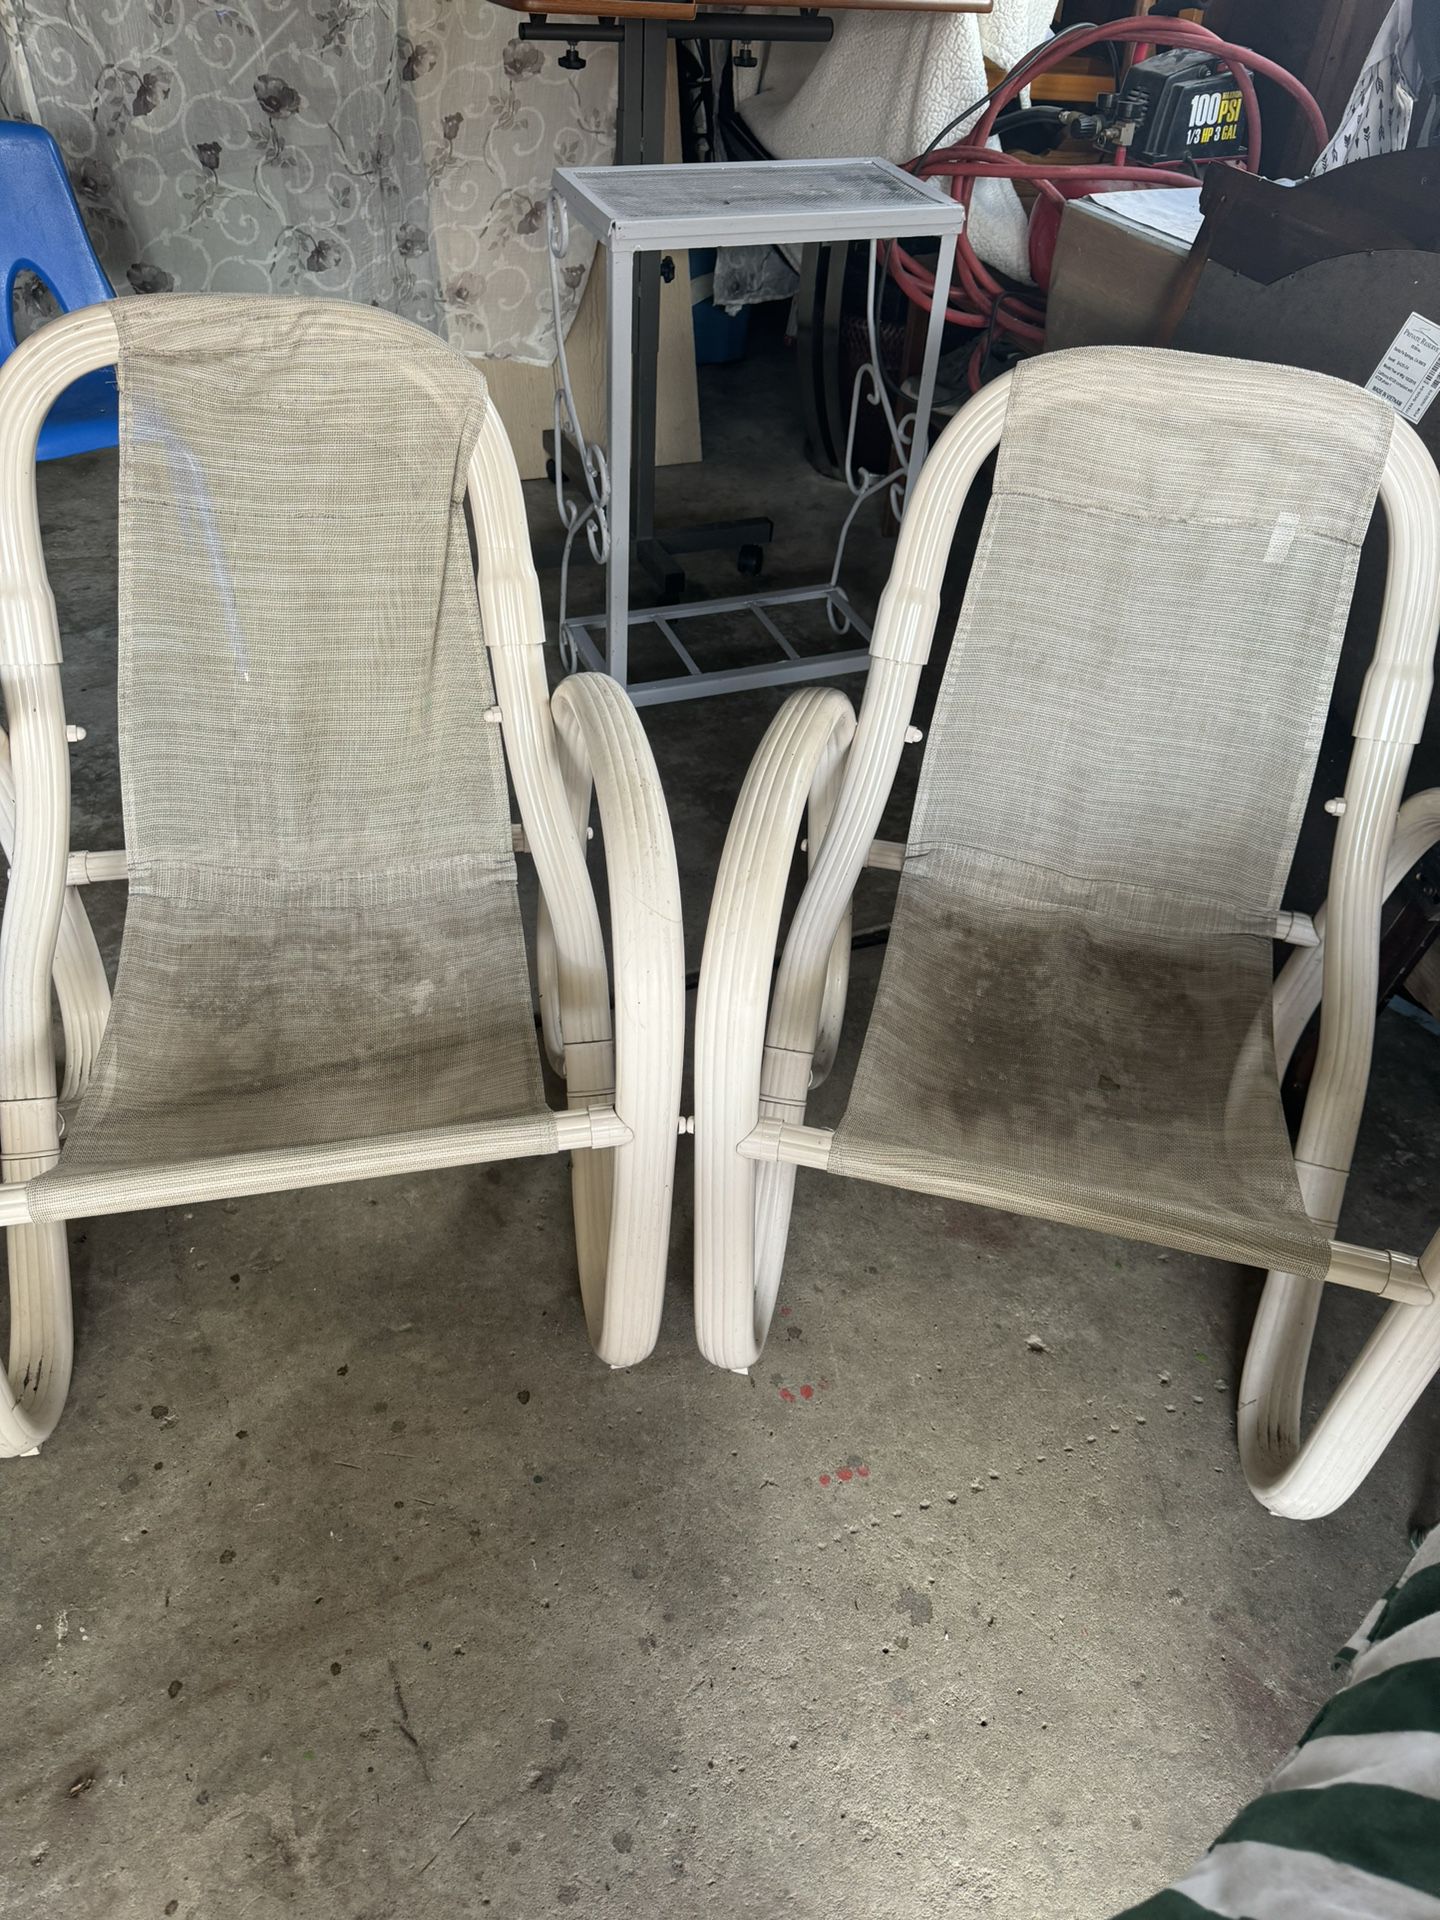 2 Chairs With cushions